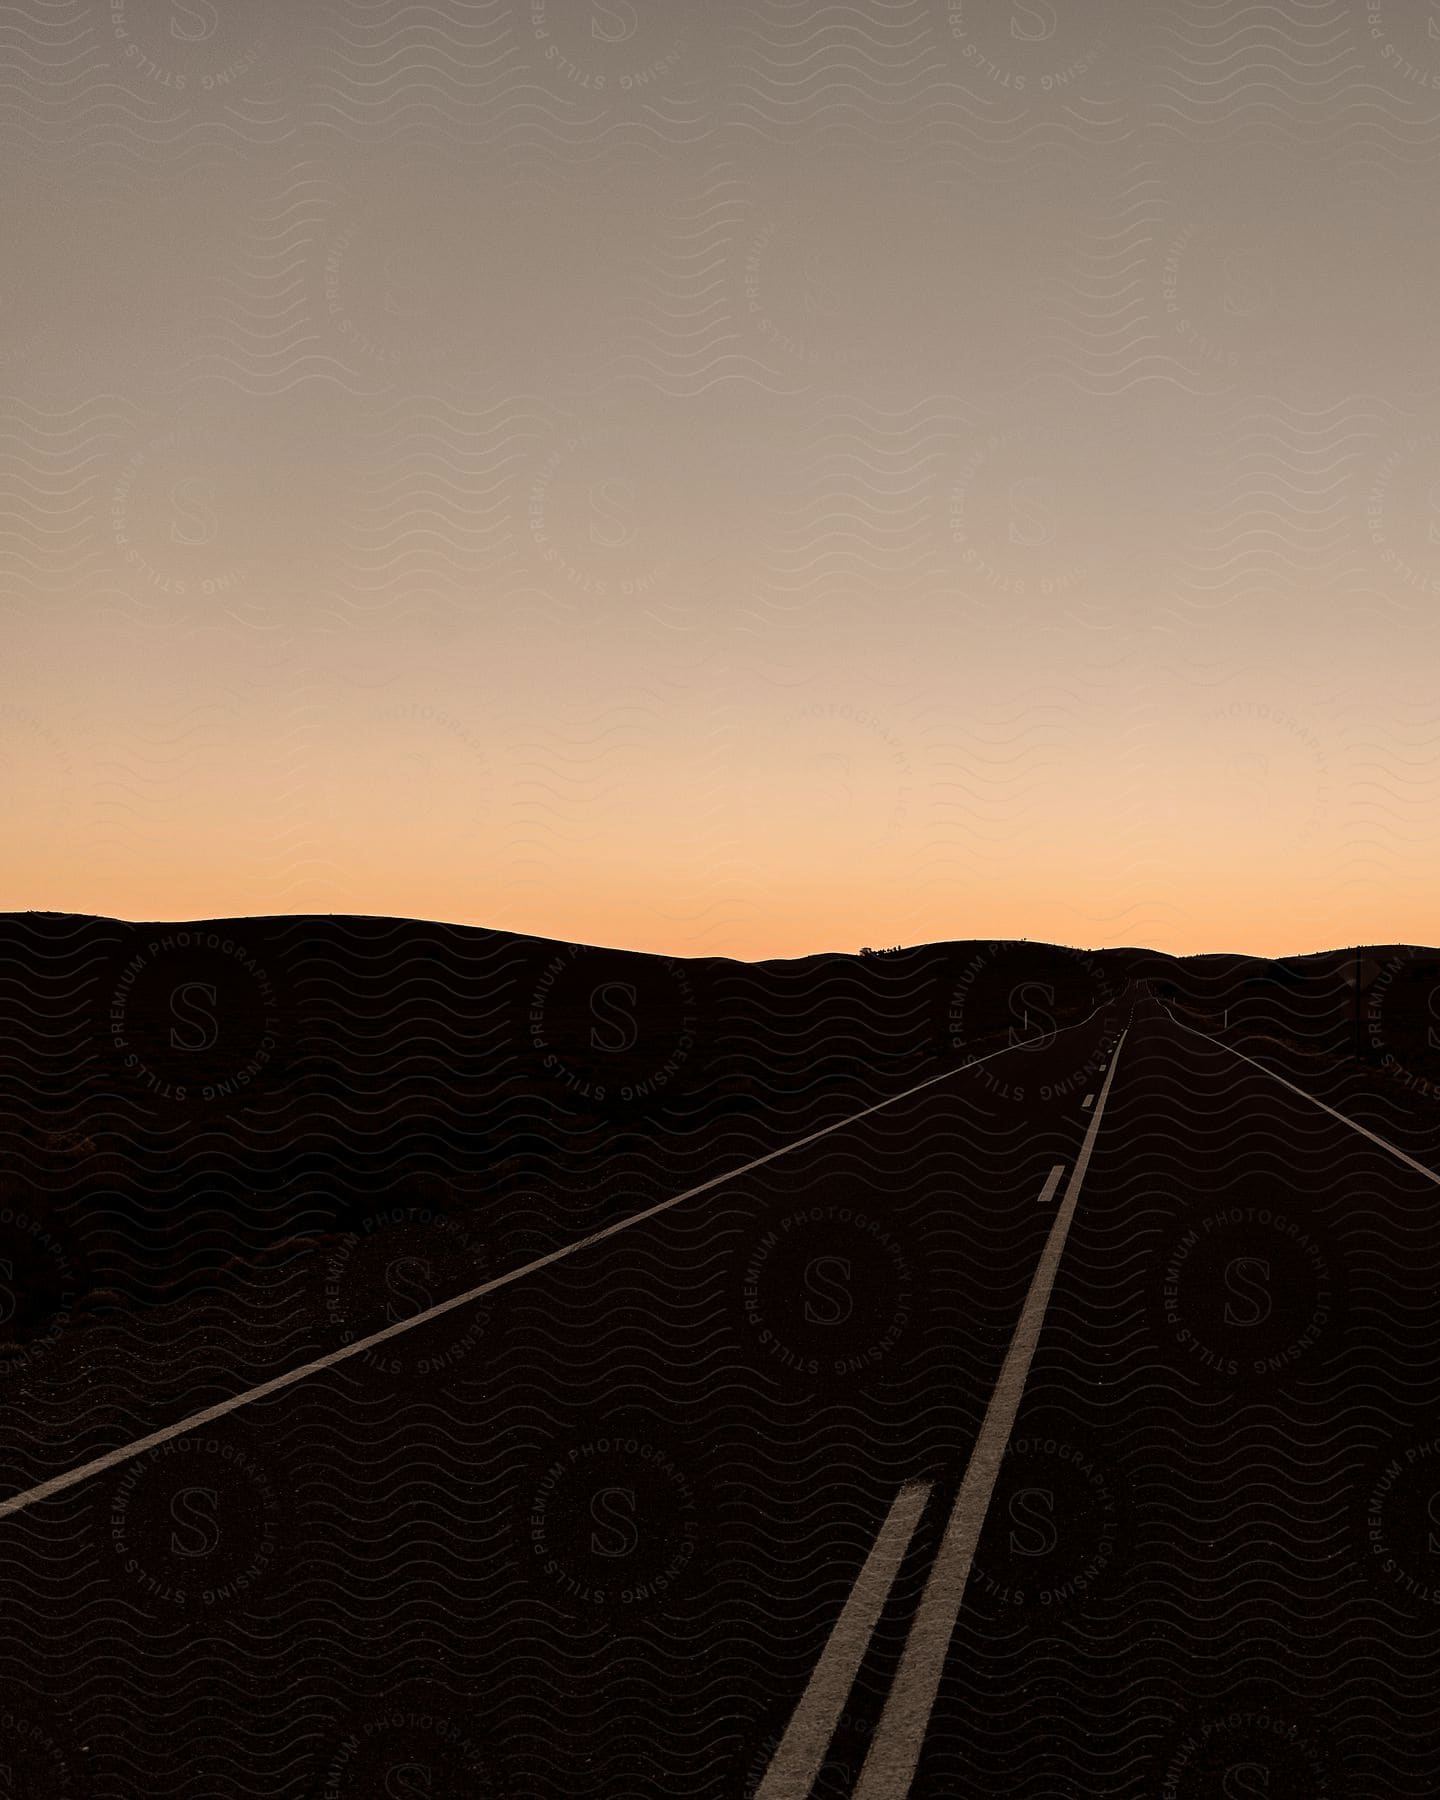 An open highway stretches towards distant hills under a clear sky